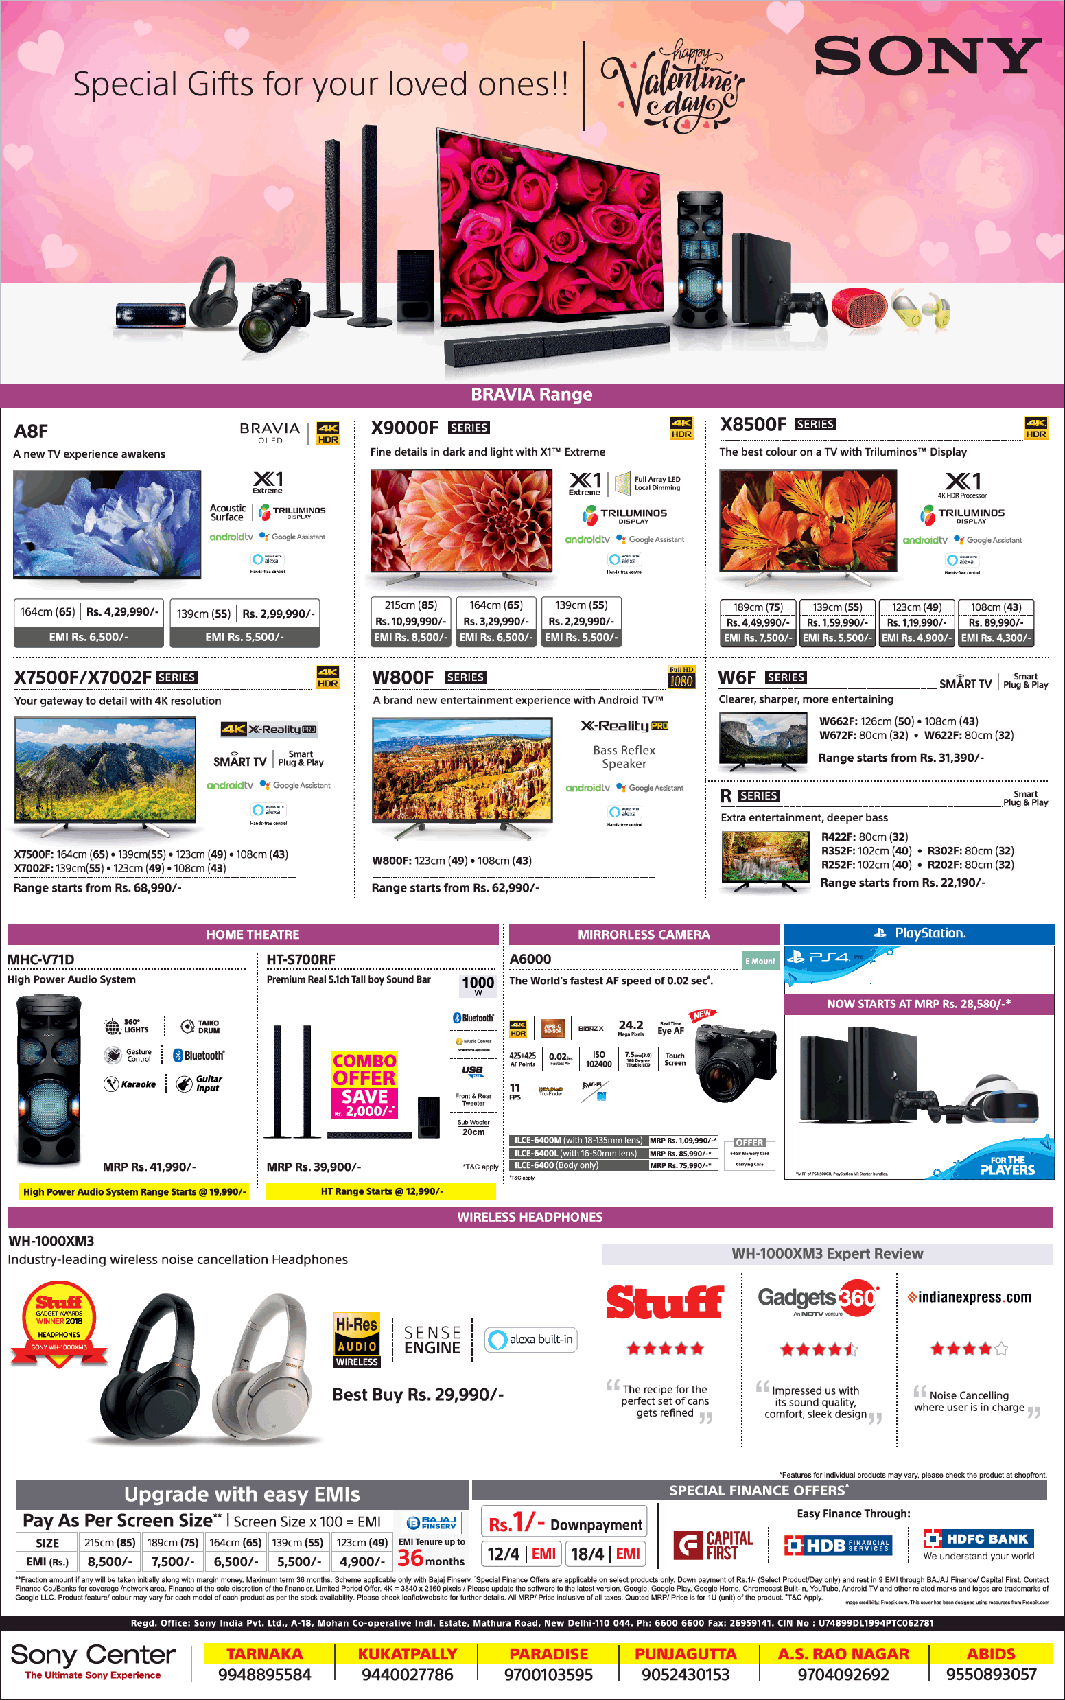 sony-special-gifts-for-your-loved-ones-ad-times-of-india-hyderabad-15-02-2019.png